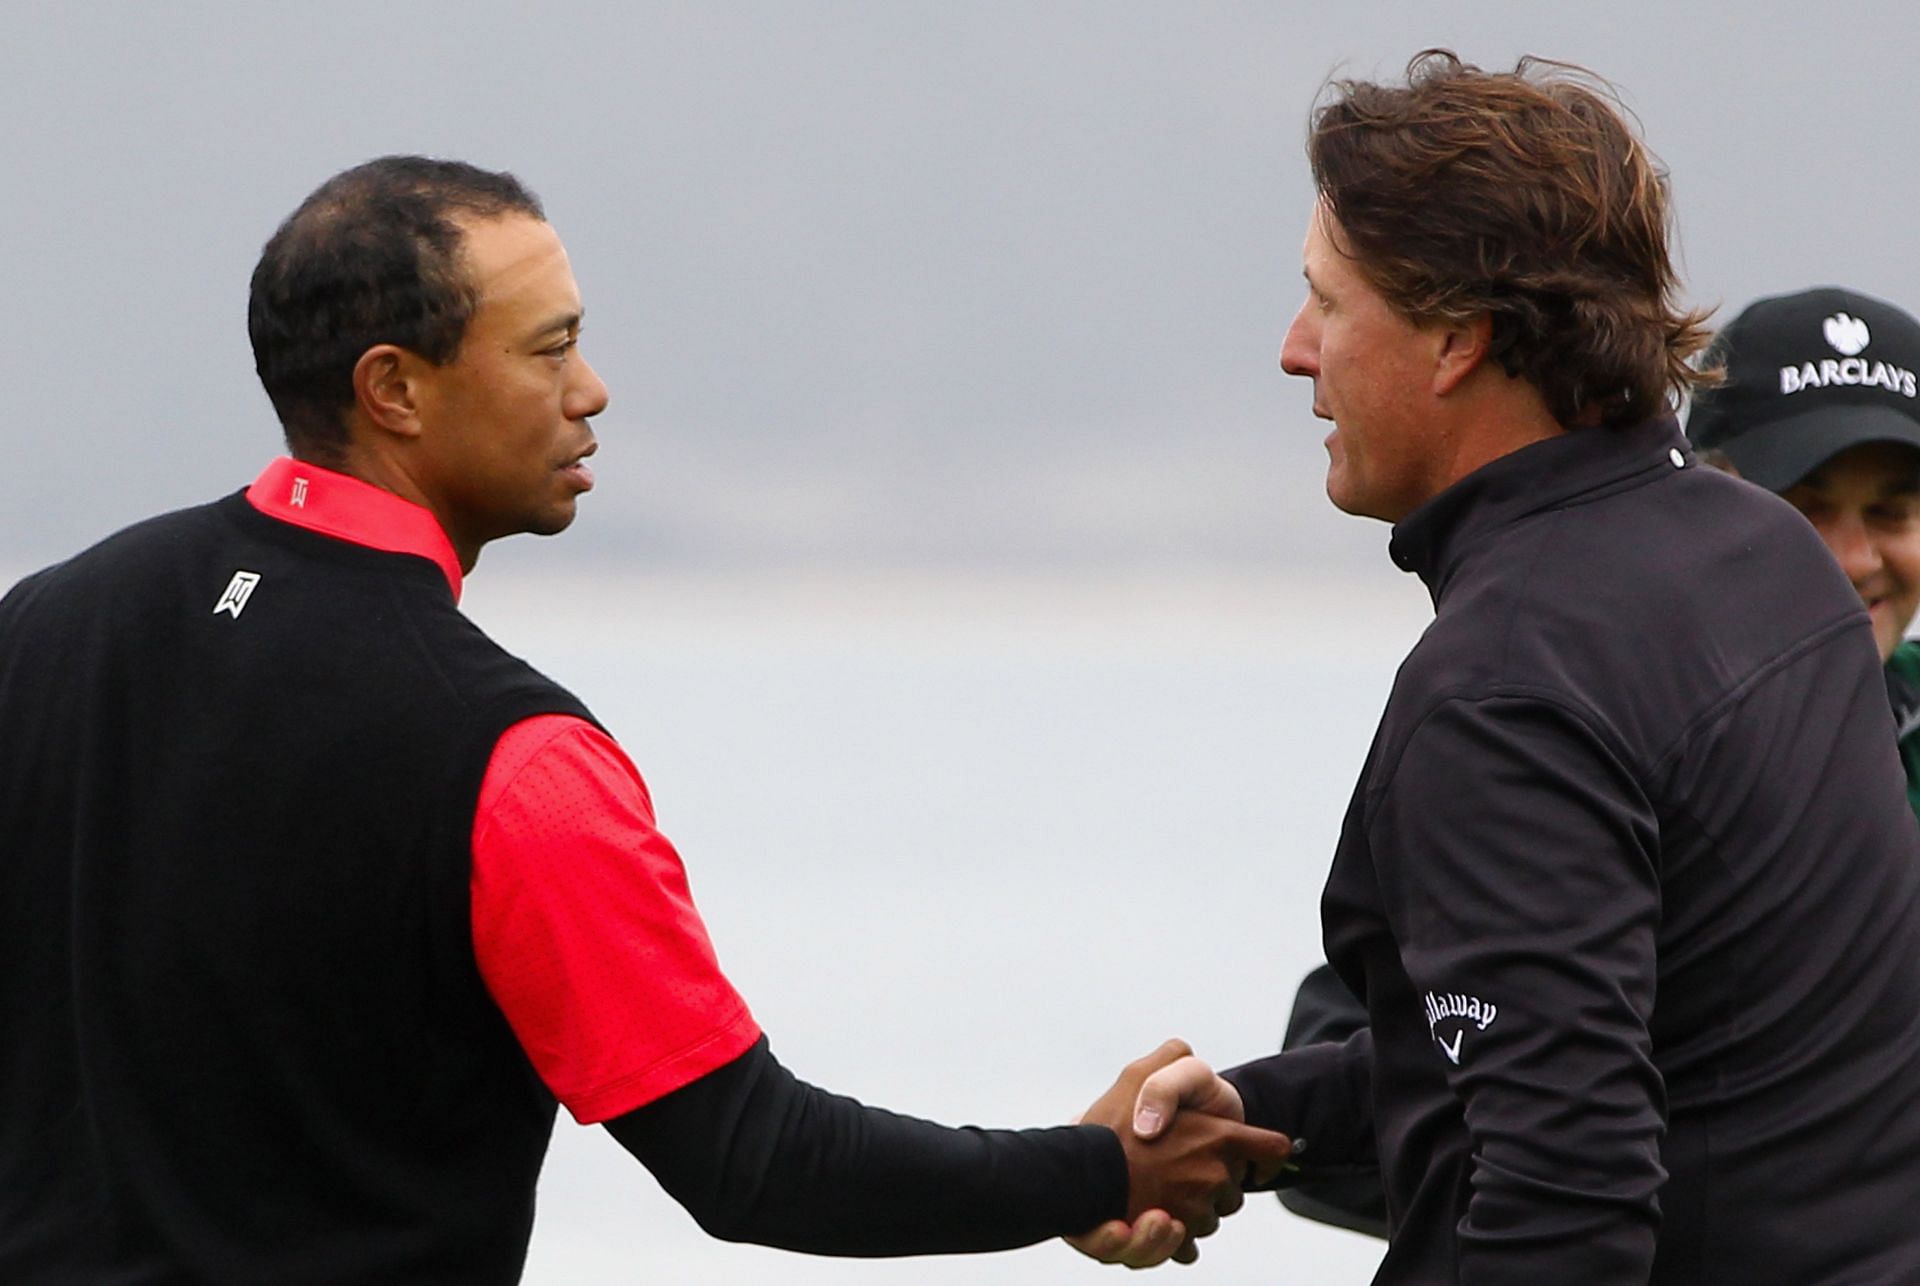 Tiger Woods and Phil Mickelson (via Getty Images)